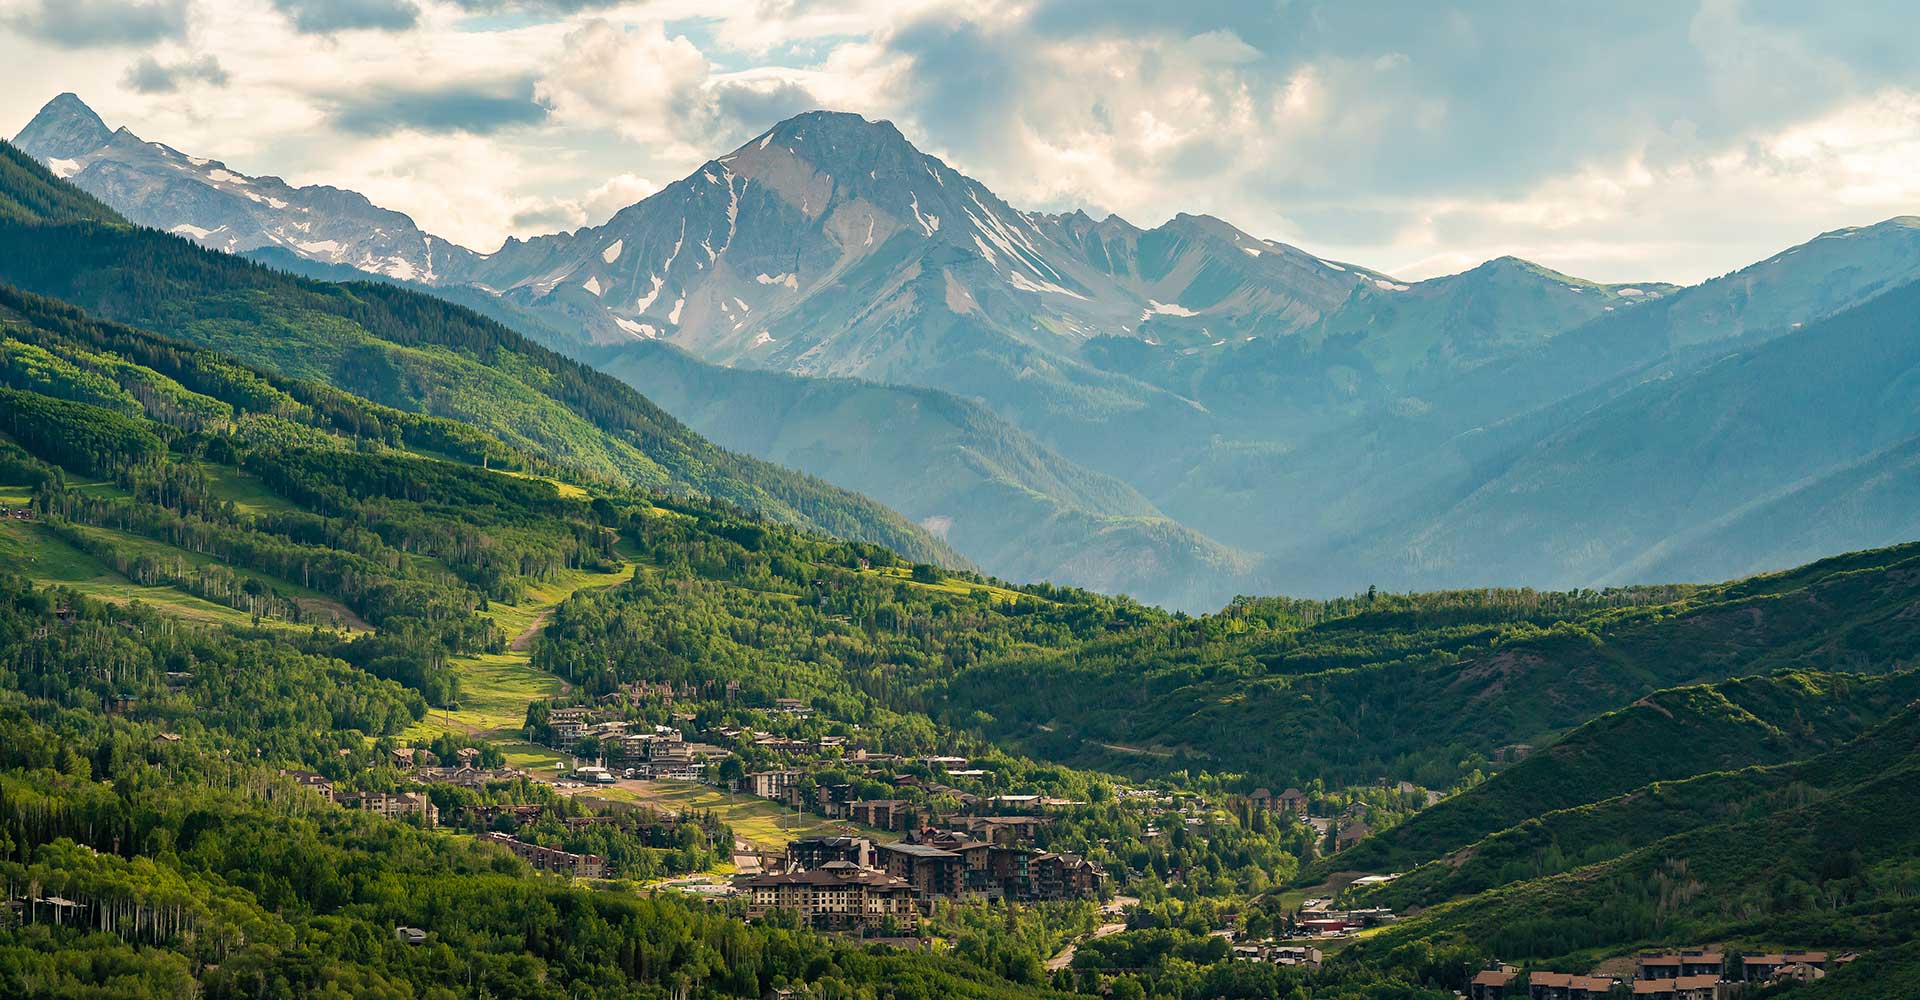 Mount Daly rises over Snowmass Village in summer.